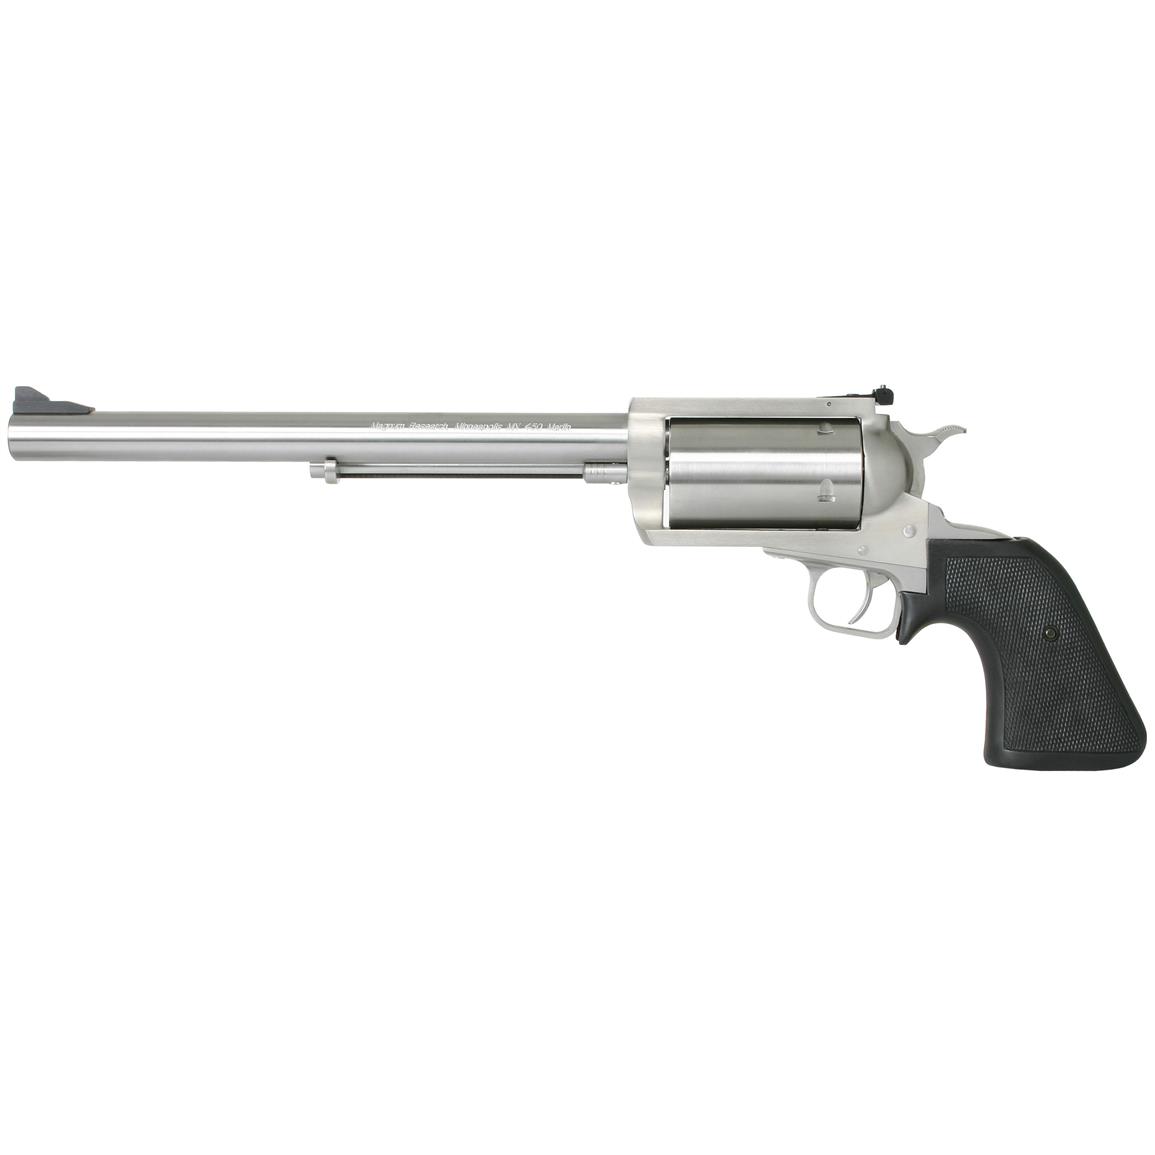 Magnum Research BFR, Revolver, .30 / 30 Winchester, BFR3030, 761226034063